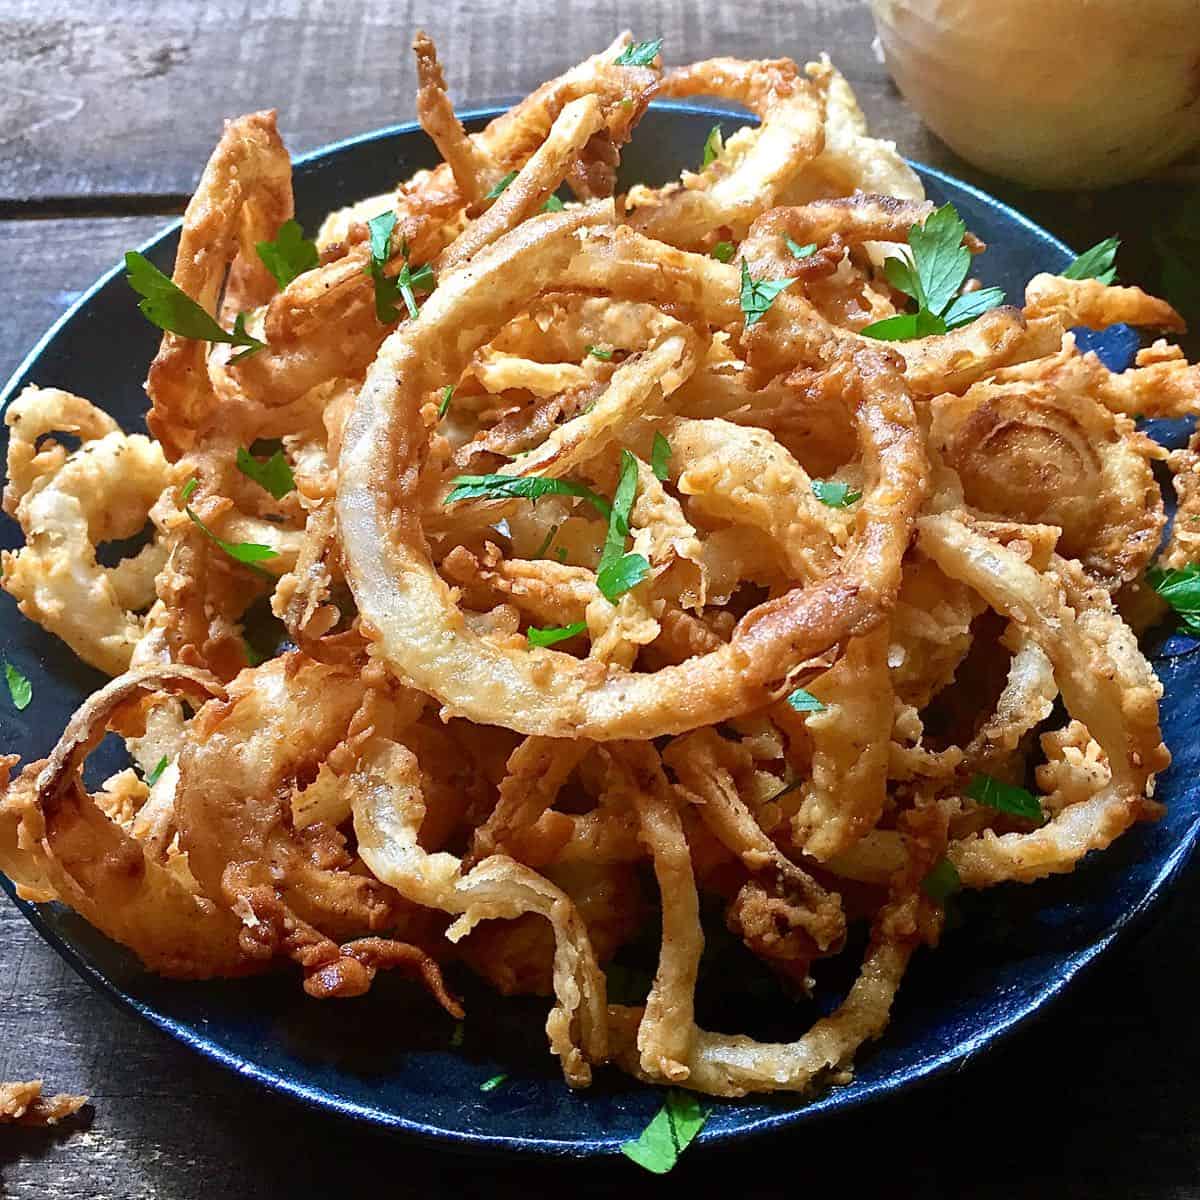 A large serving of fried onion rings.